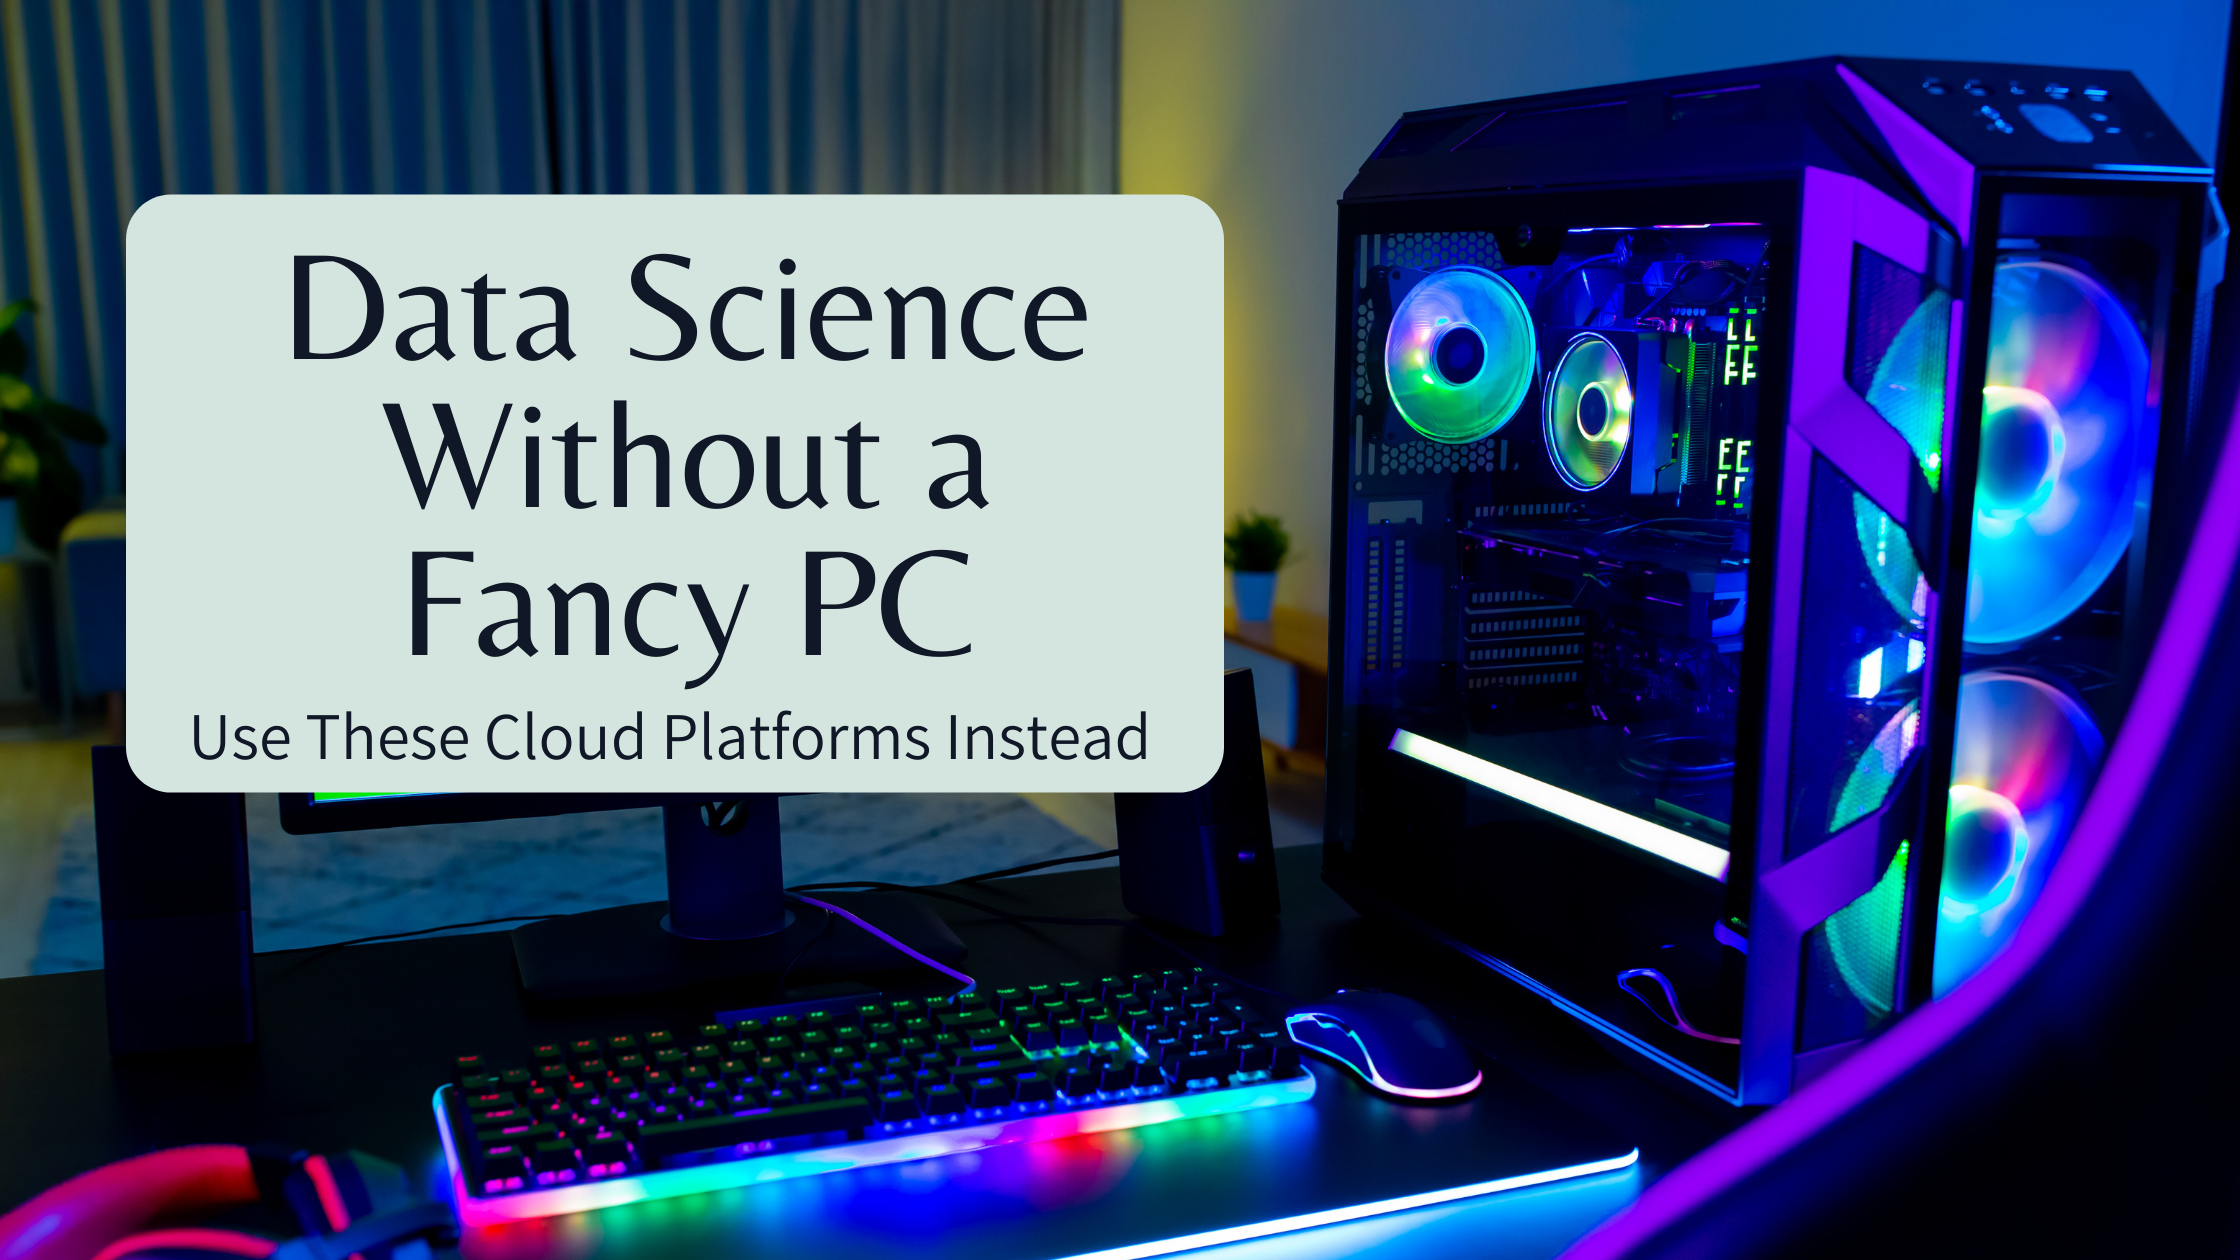 Data Science Without a Fancy PC